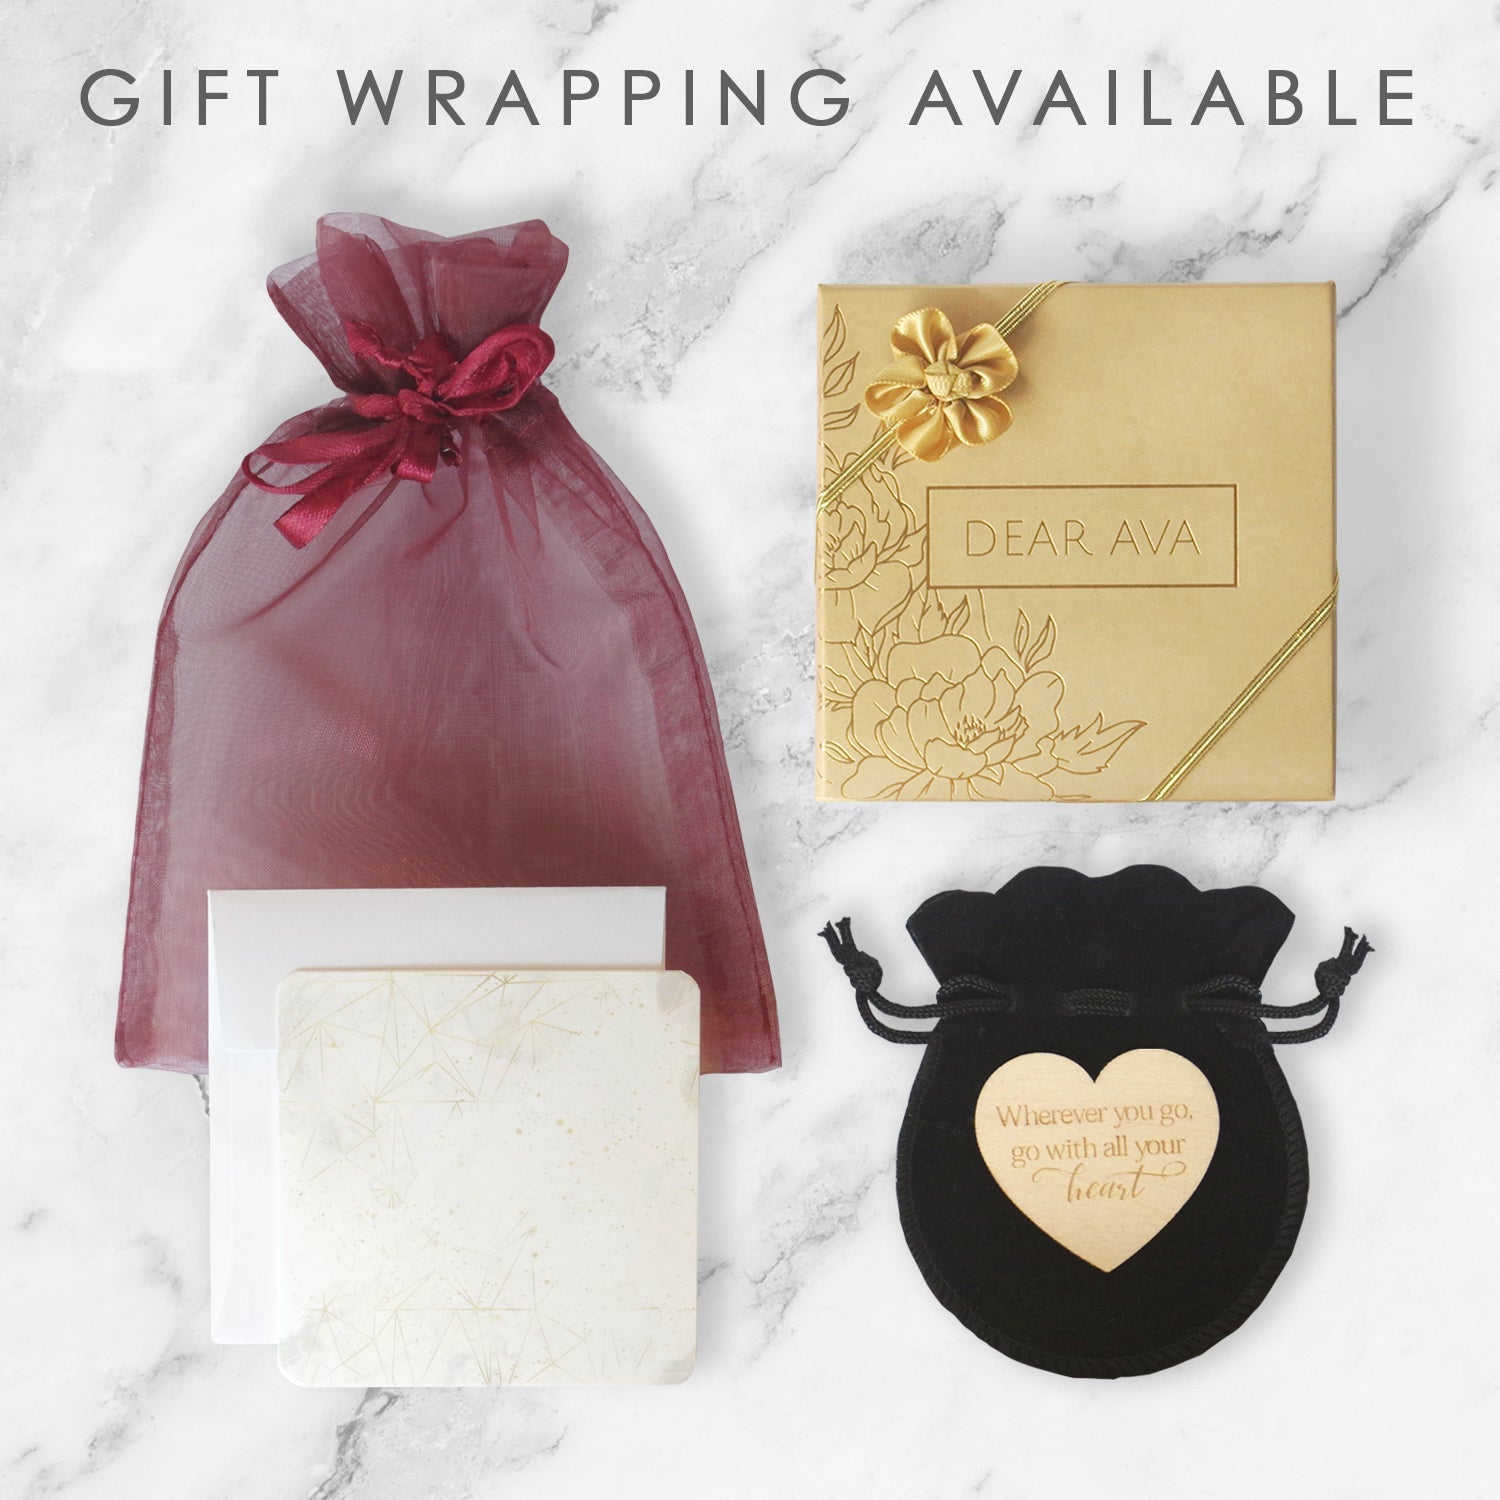 Christmas Gift for Mother-in-Law Spa Gift Box - Dear Ava